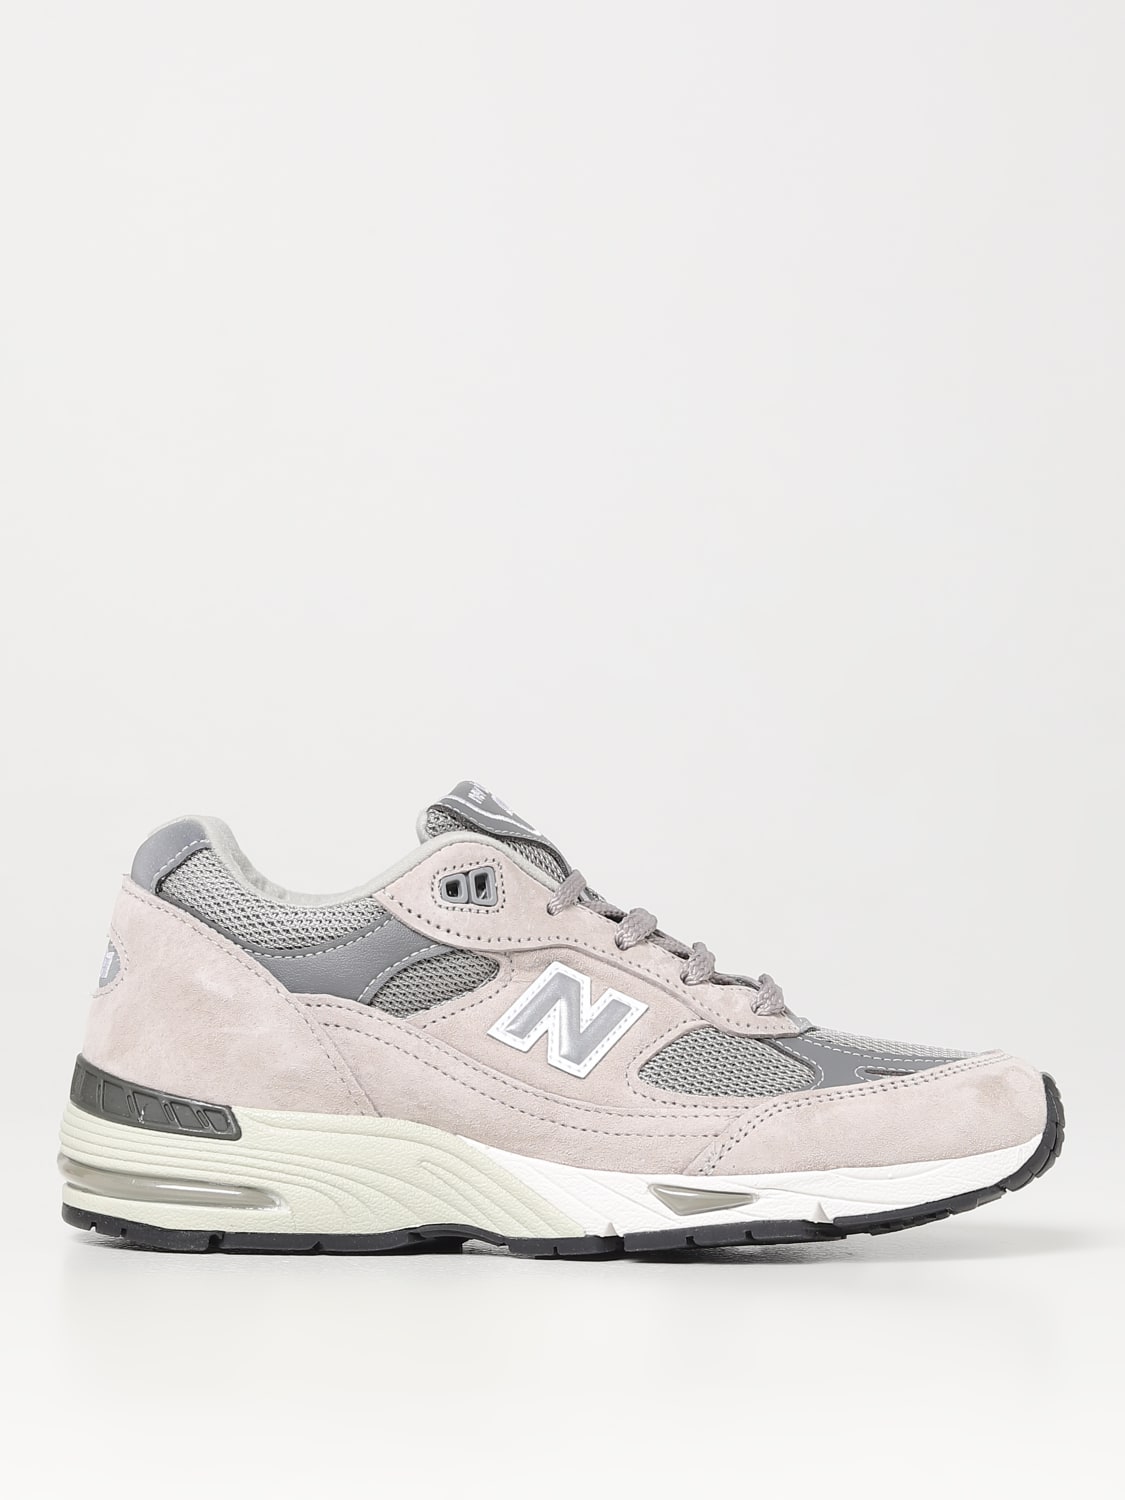 Locura Implementar Plausible NEW BALANCE: sneakers for woman - Grey | New Balance sneakers NBW991GL  online on GIGLIO.COM